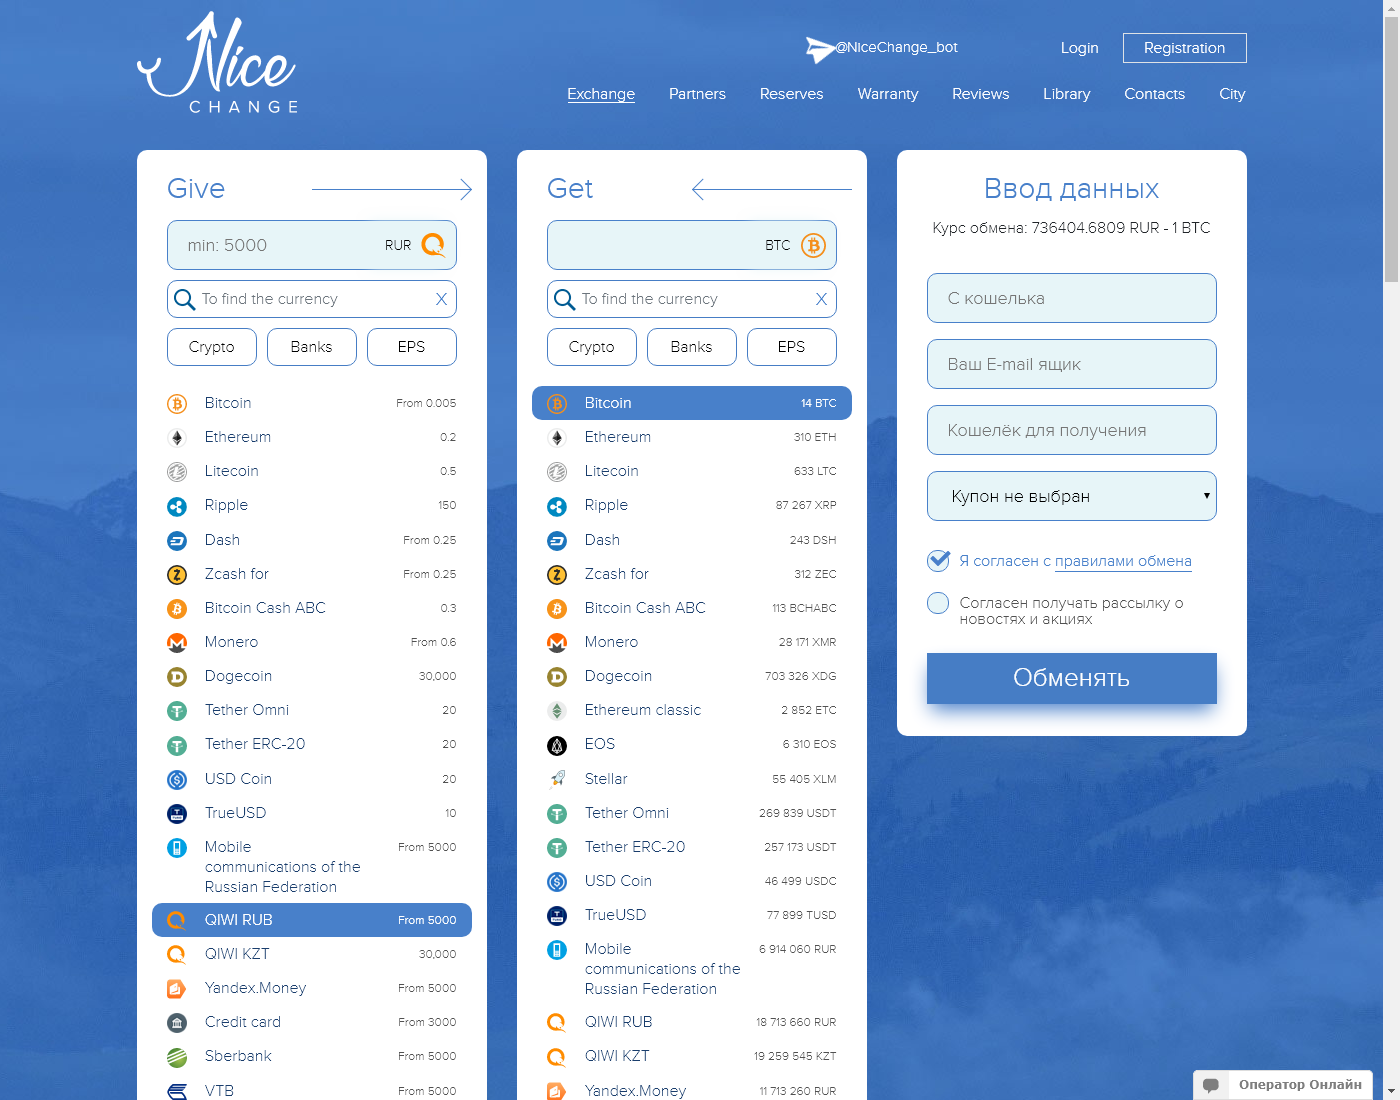 NiceChange user interface: the home page in English